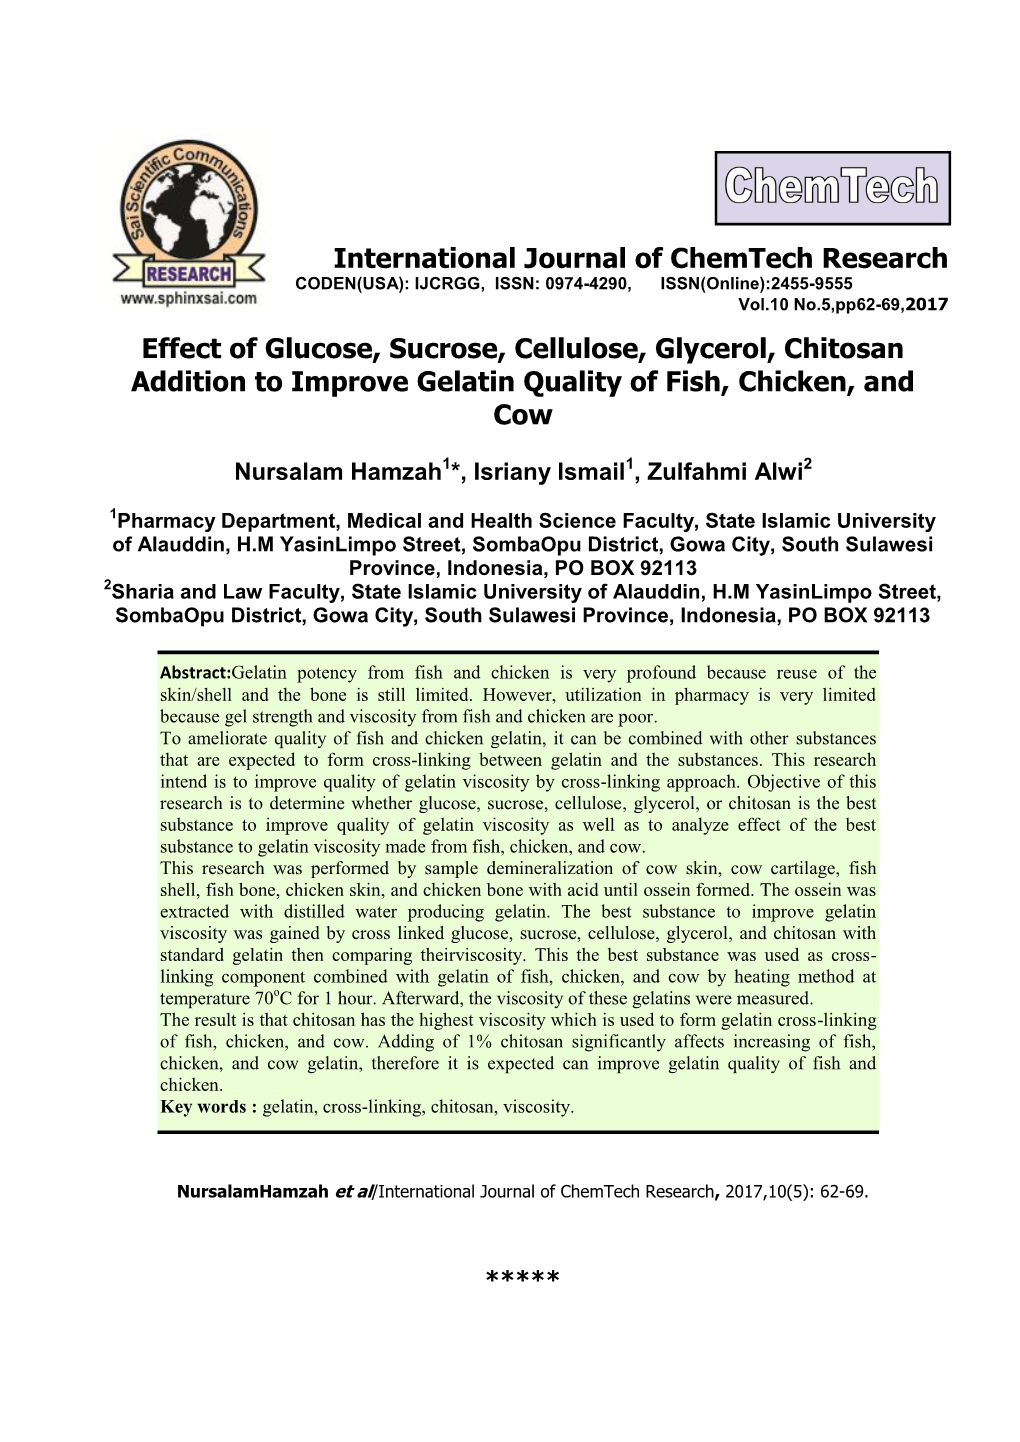 Effect of Glucose, Sucrose, Cellulose, Glycerol, Chitosan Addition to Improve Gelatin Quality of Fish, Chicken, and Cow